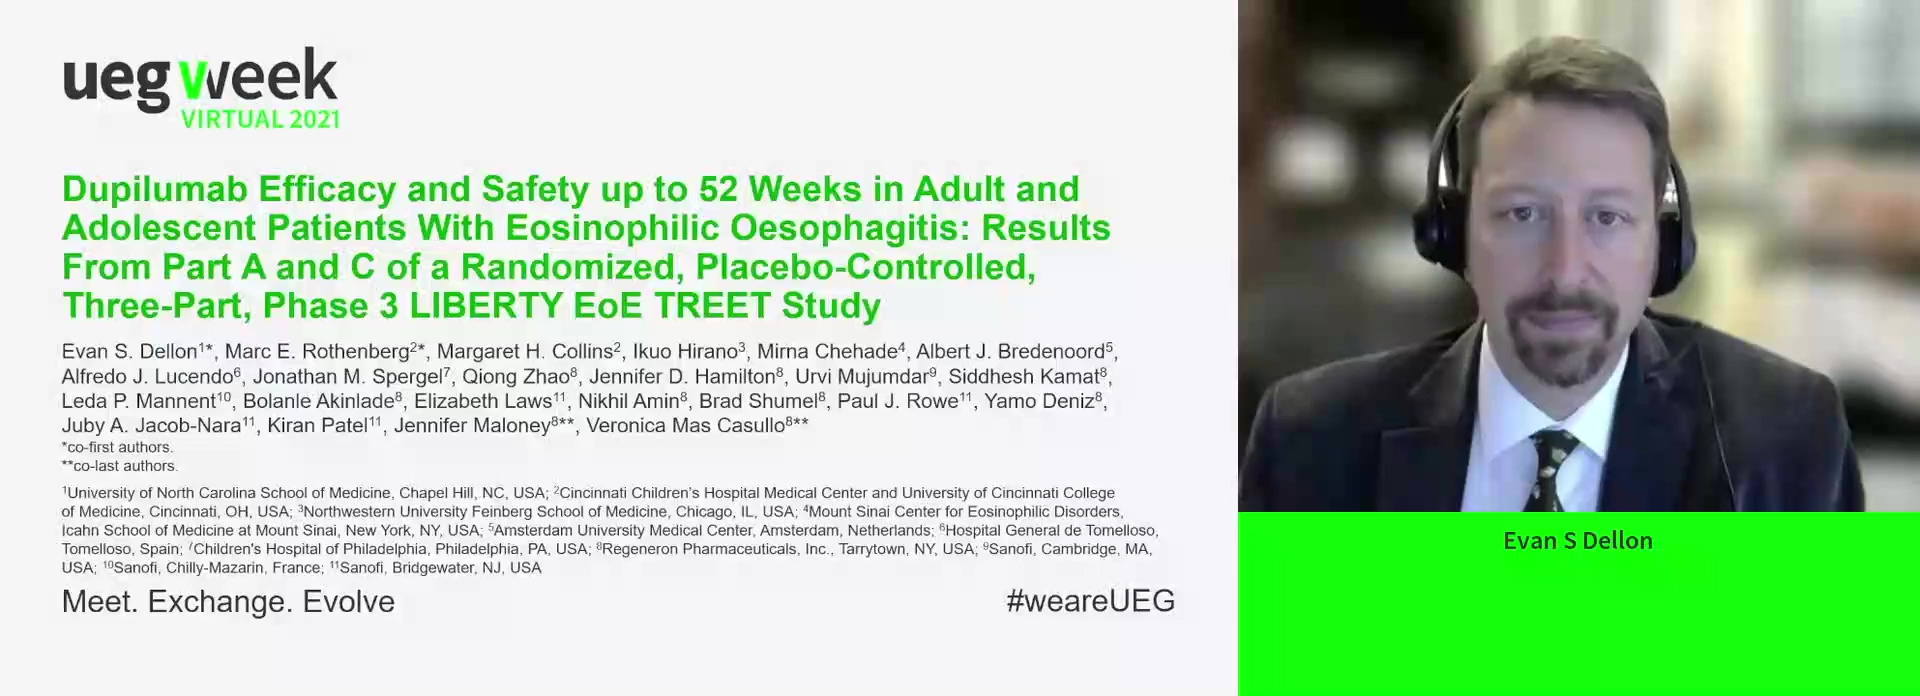 DUPILUMAB EFFICACY AND SAFETY UP TO 52 WEEKS IN ADULT AND ADOLESCENT PATIENTS WITH EOSINOPHILIC ESOPHAGITIS: RESULTS FROM PART A AND C OF A RANDOMIZED, PLACEBO-CONTROLLED, THREE-PART, PHASE 3 LIBERTY EOE TREET STUDY